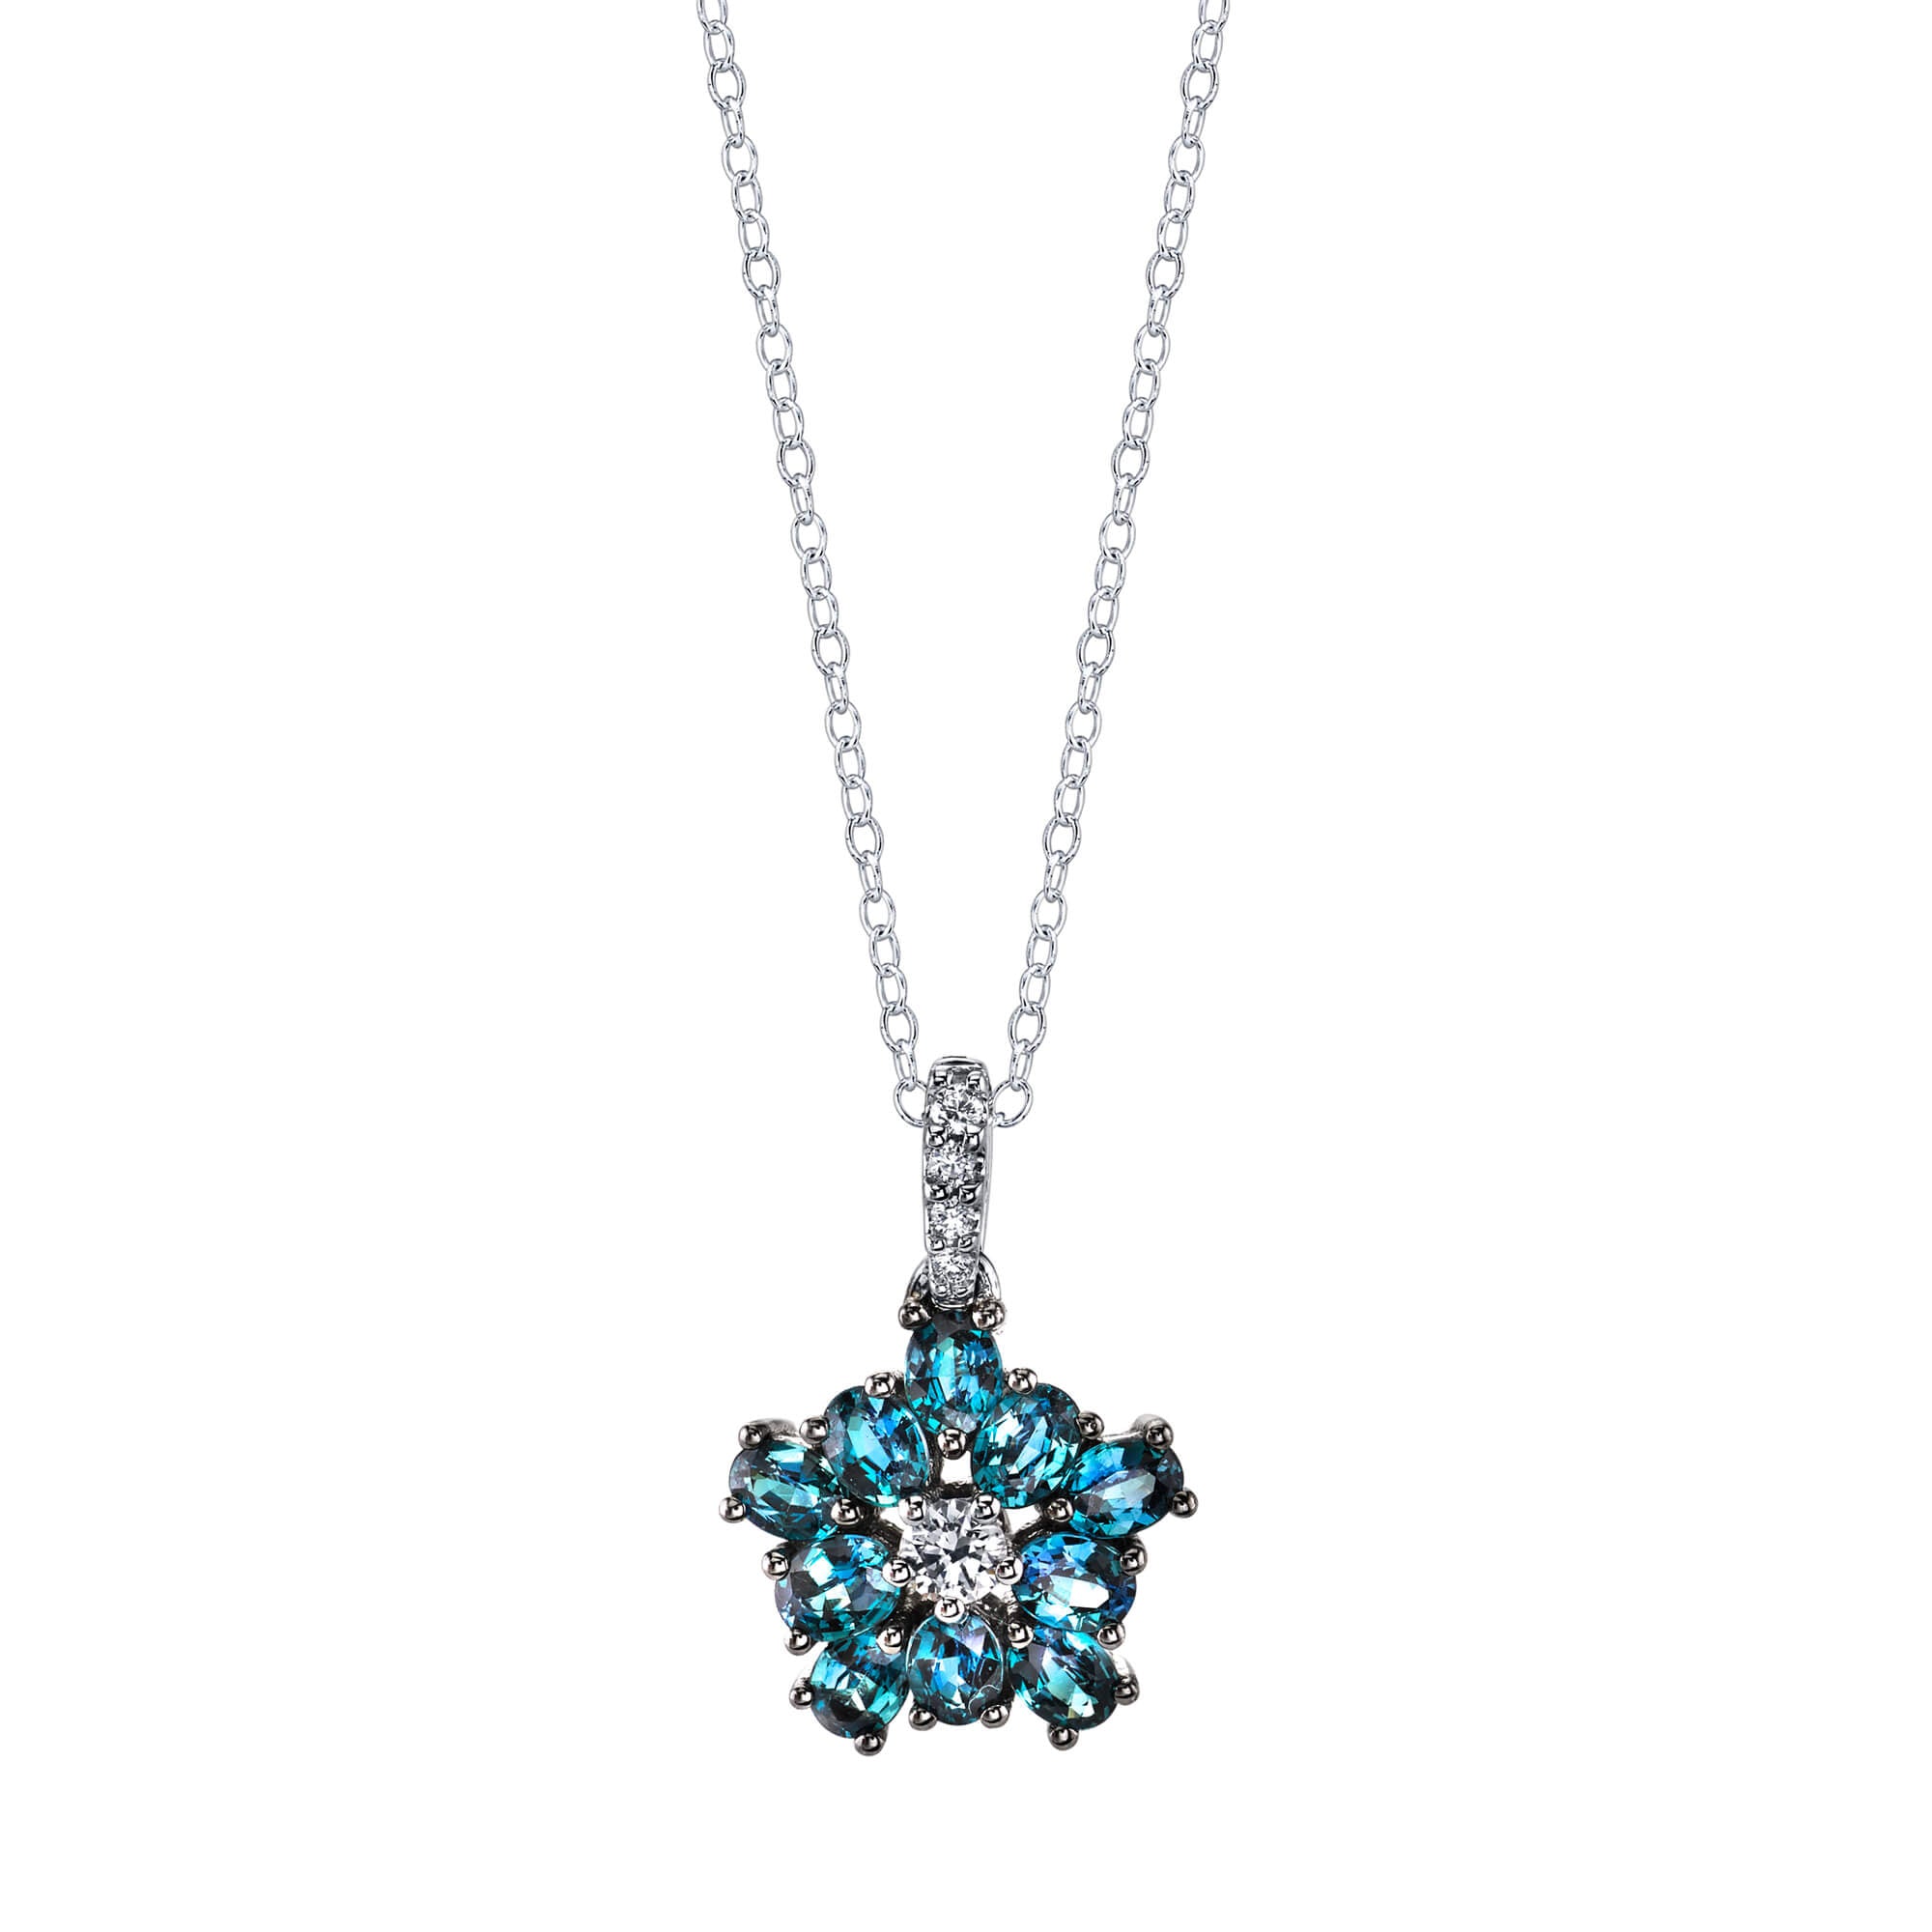 Natural Alexandrite Pendant Necklace in 18K White Gold